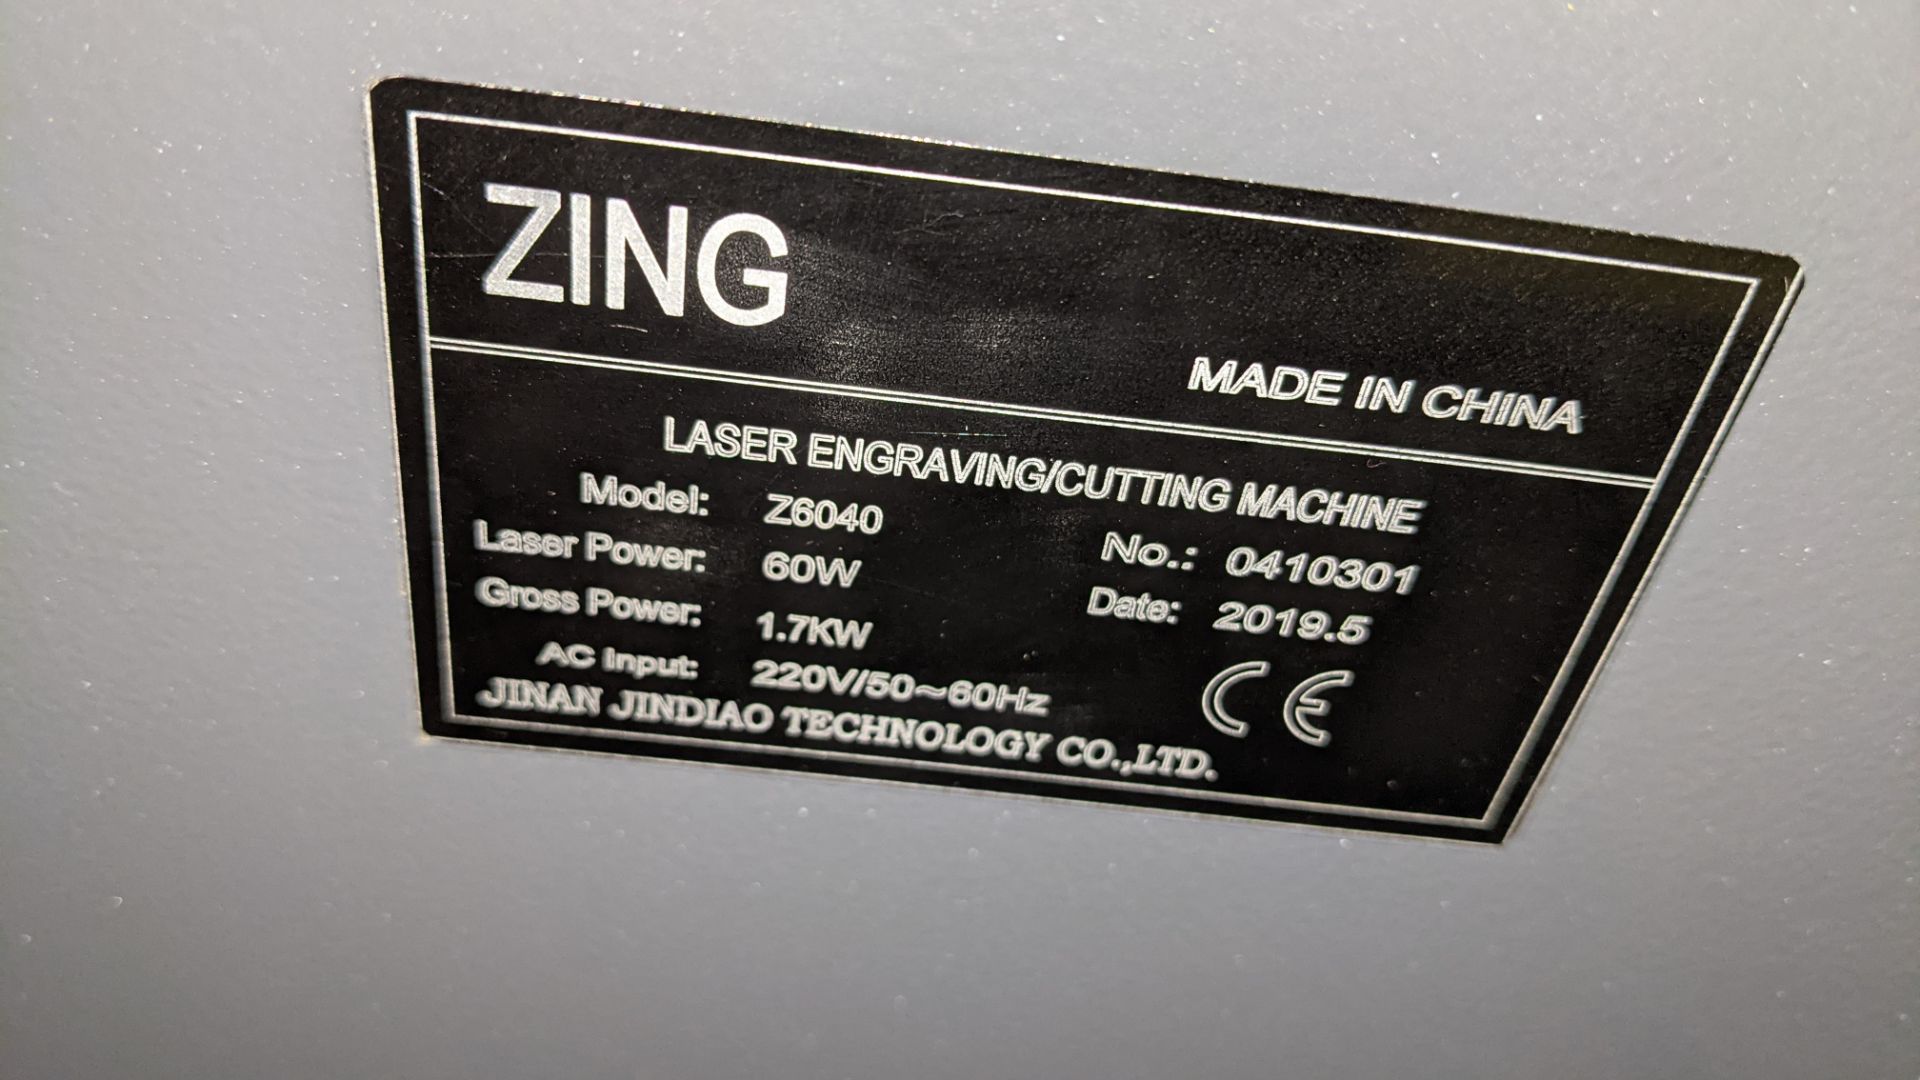 2019 Zing laser engraving machine/cutter, model Z6040. 60w laser power. Date of manufacture May 2019 - Image 13 of 29